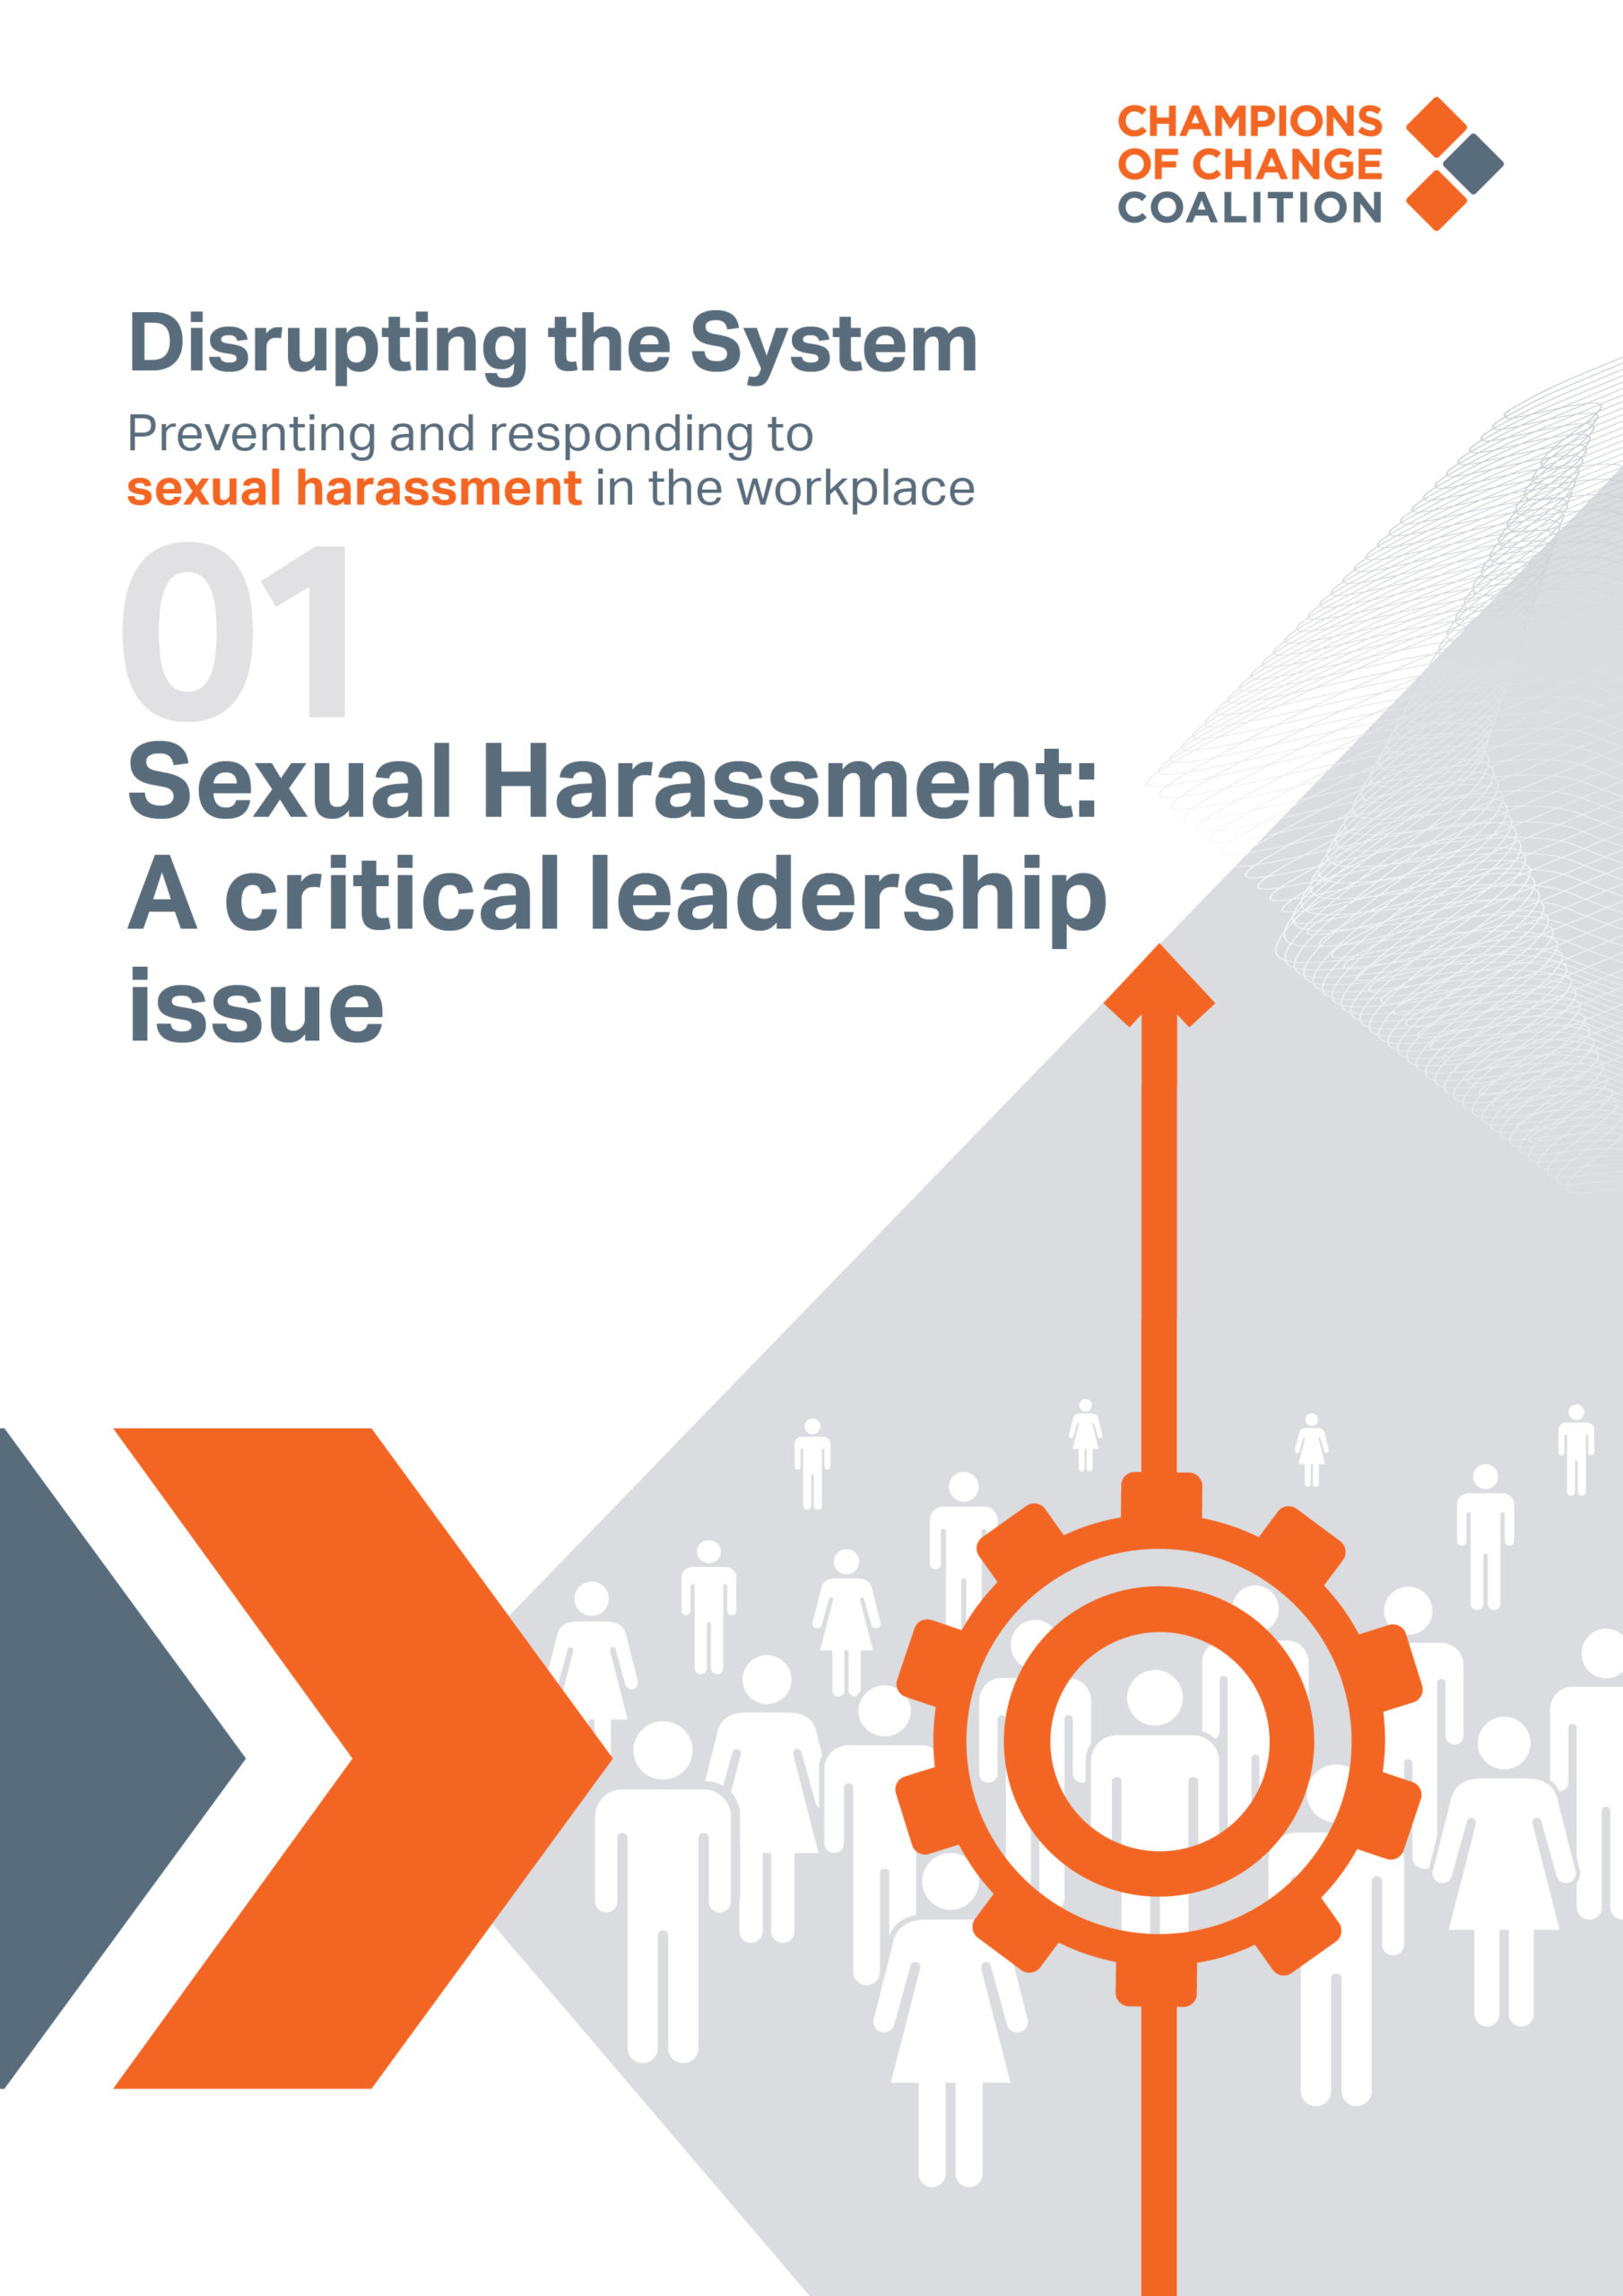 Sexual Harassment a critical leadership issue